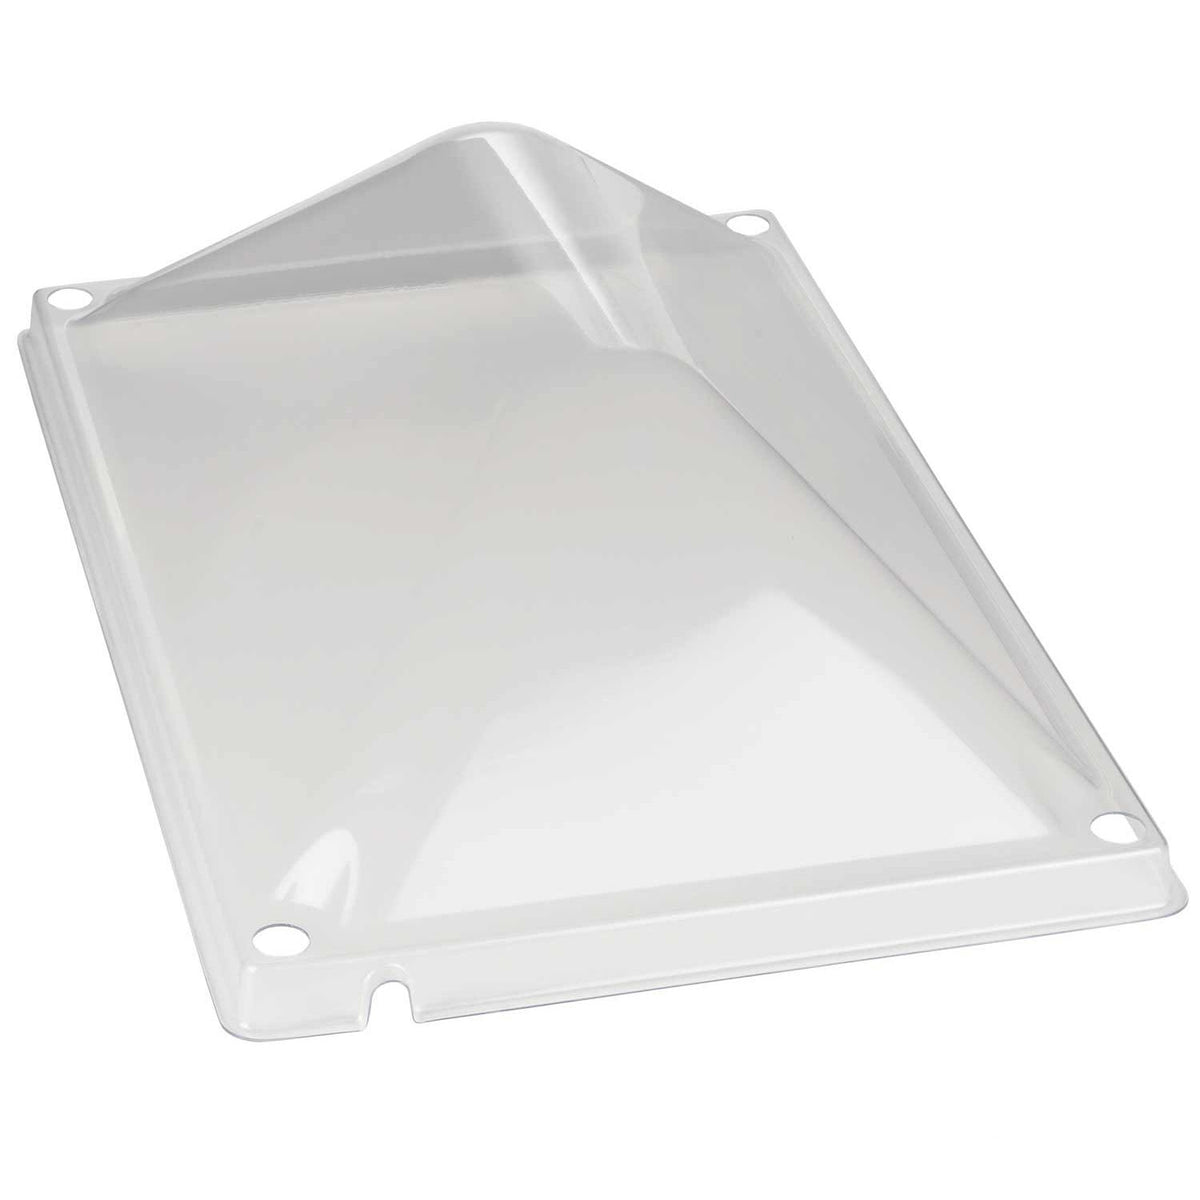 Chick Brooder Heat Plate Cover